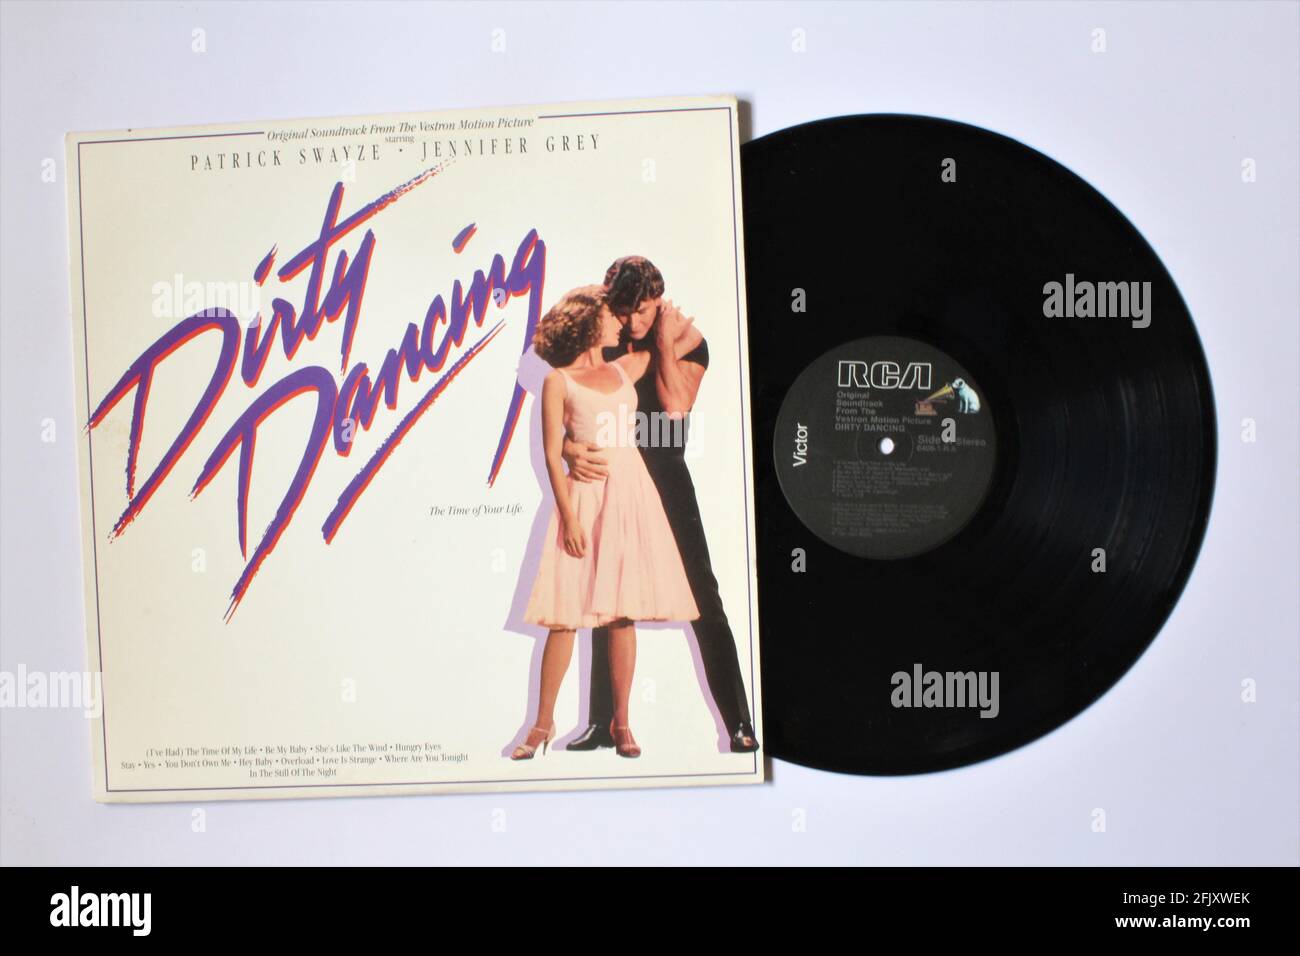 Dirty Dancing: Original Soundtrack from the Vestron Motion Picture. Music album on vinyl record LP disc. Stock Photo